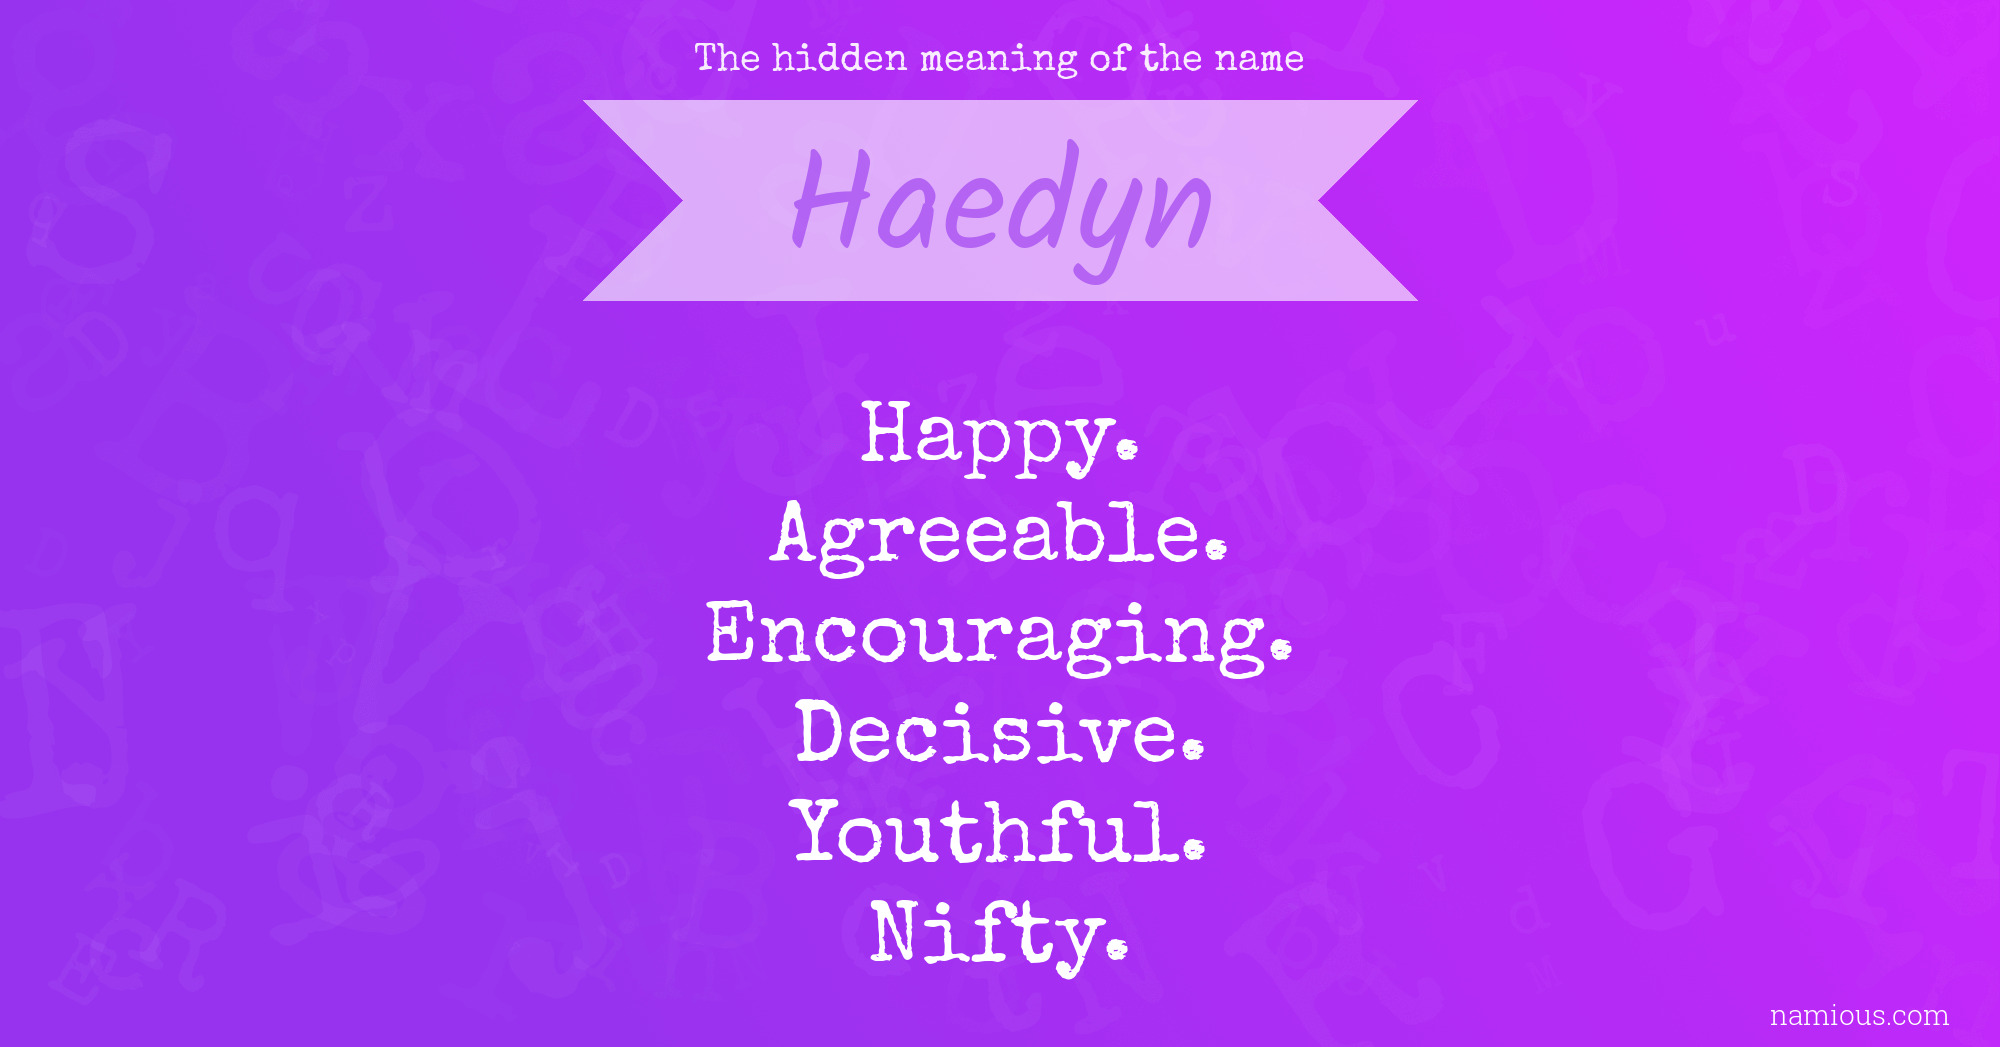 The hidden meaning of the name Haedyn